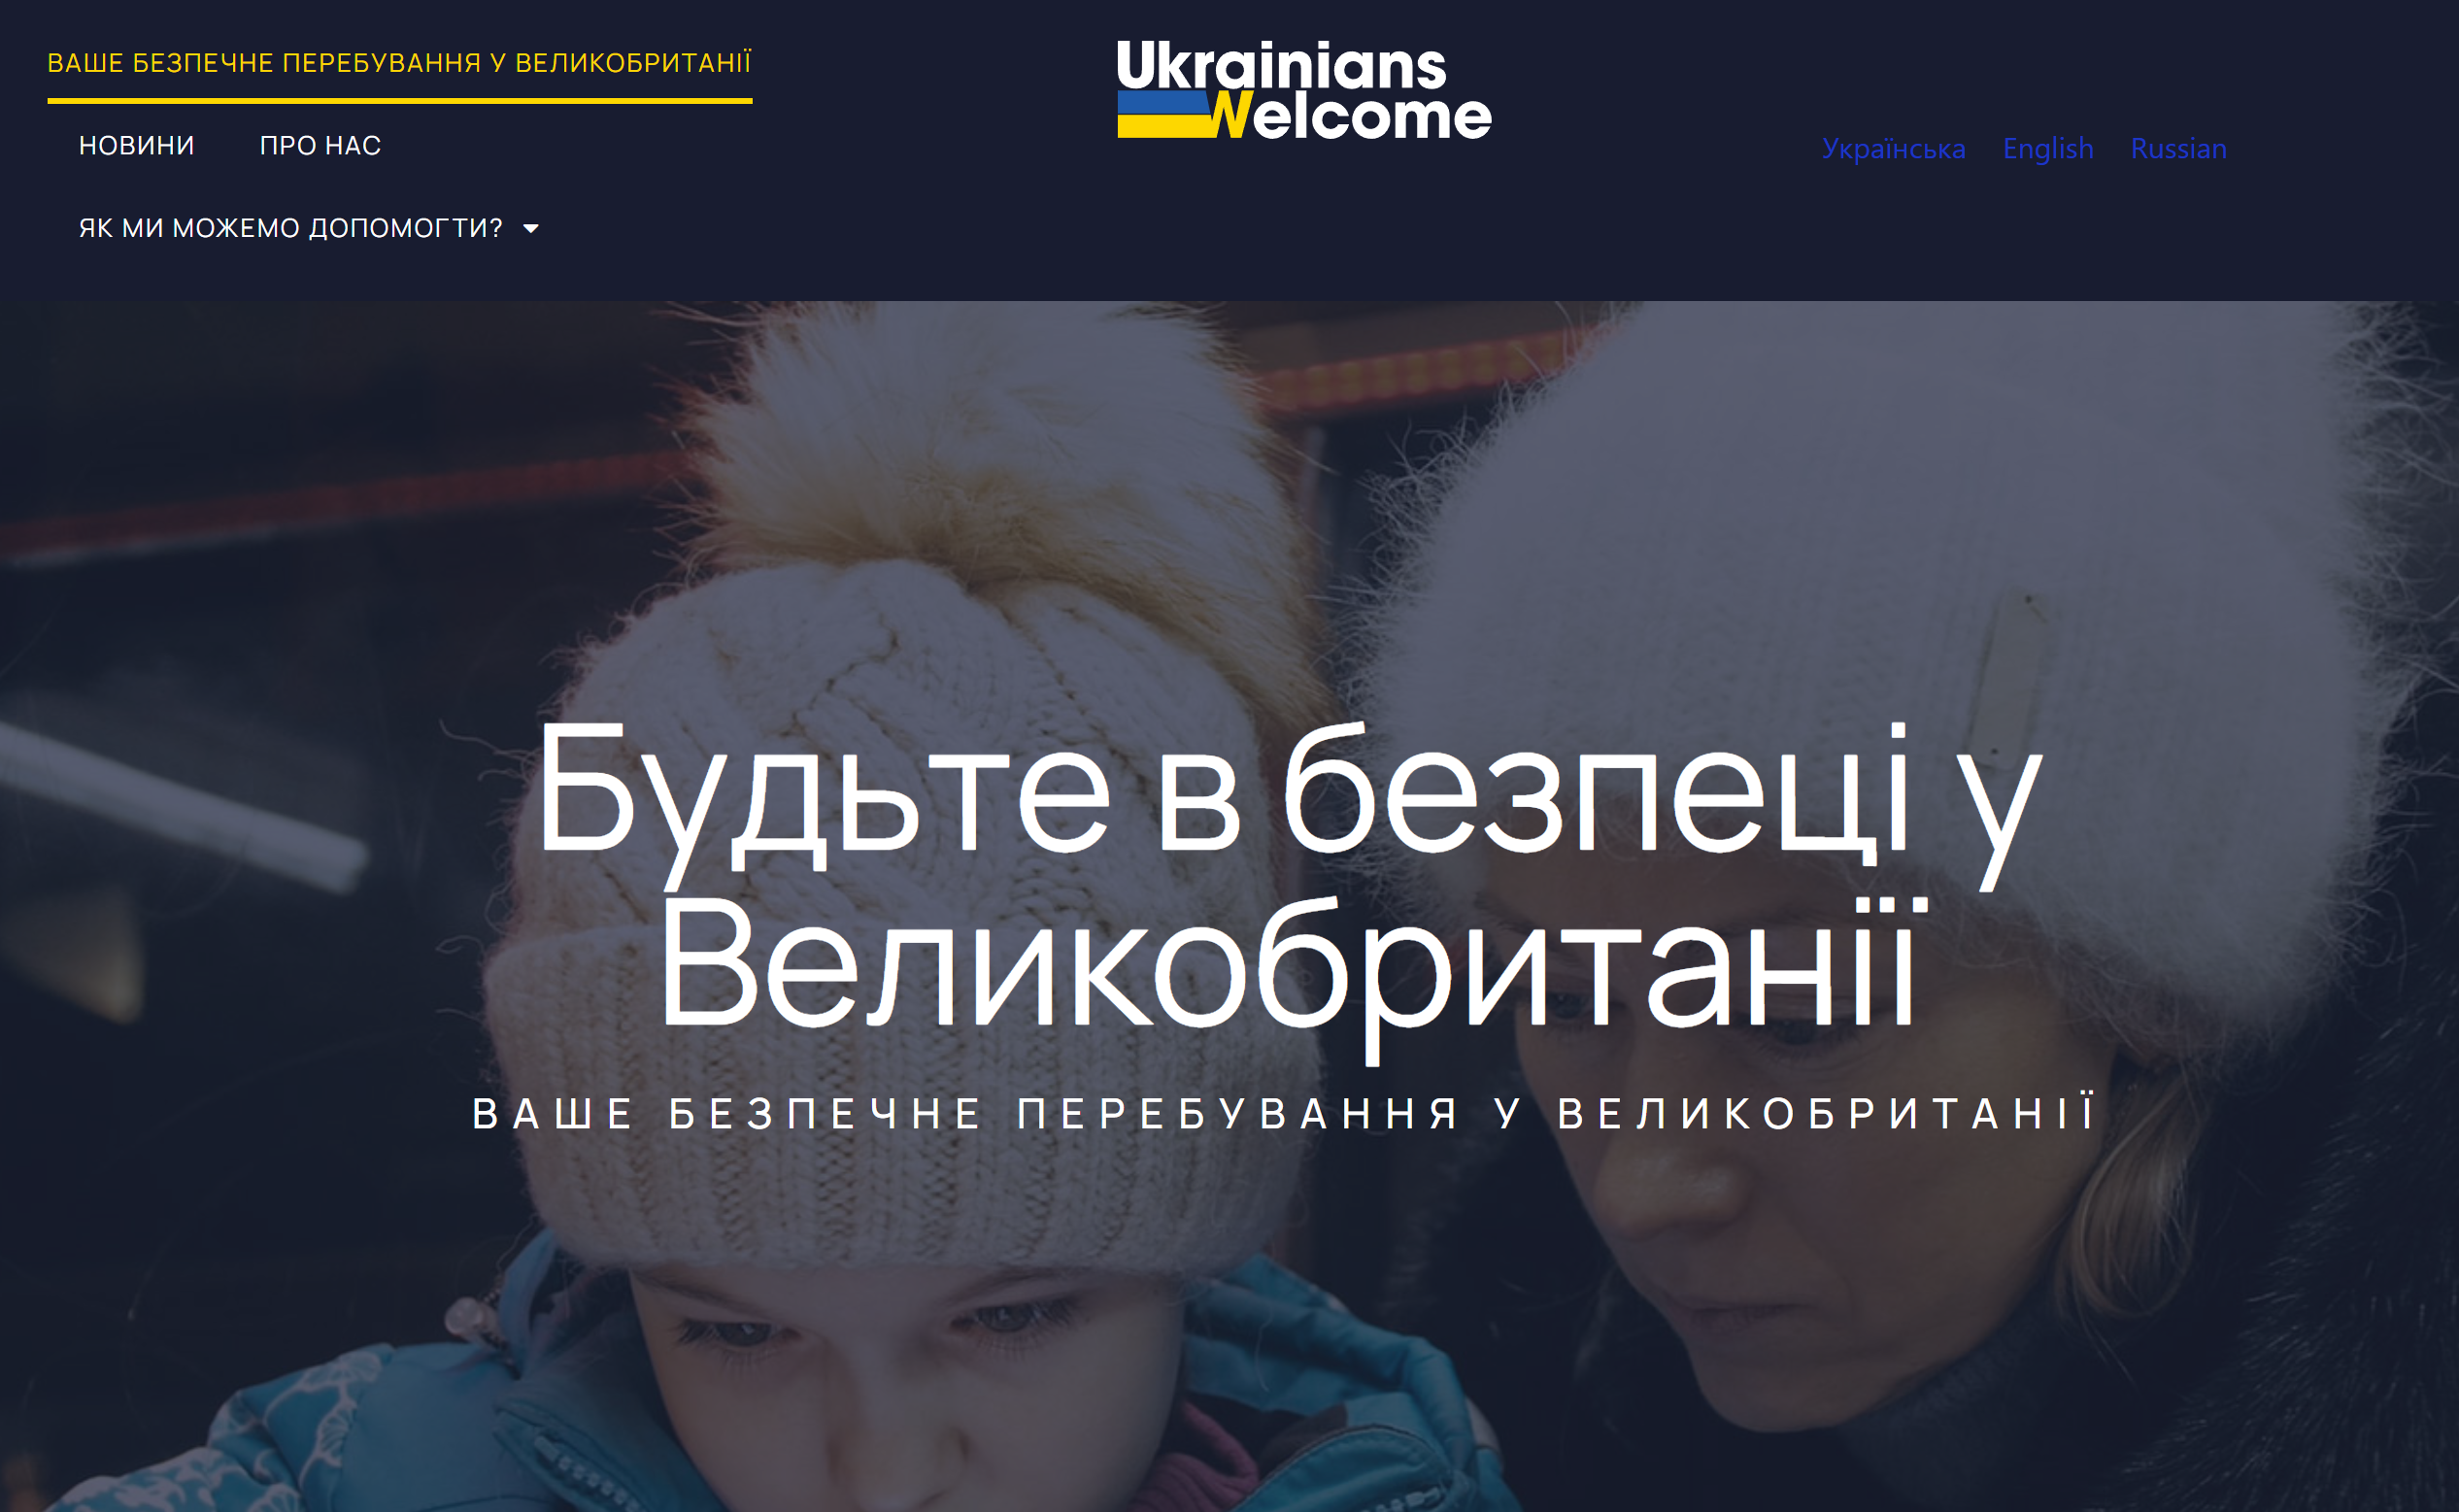 New website aimed at keeping Ukranian refugees safe and stopping exploitation